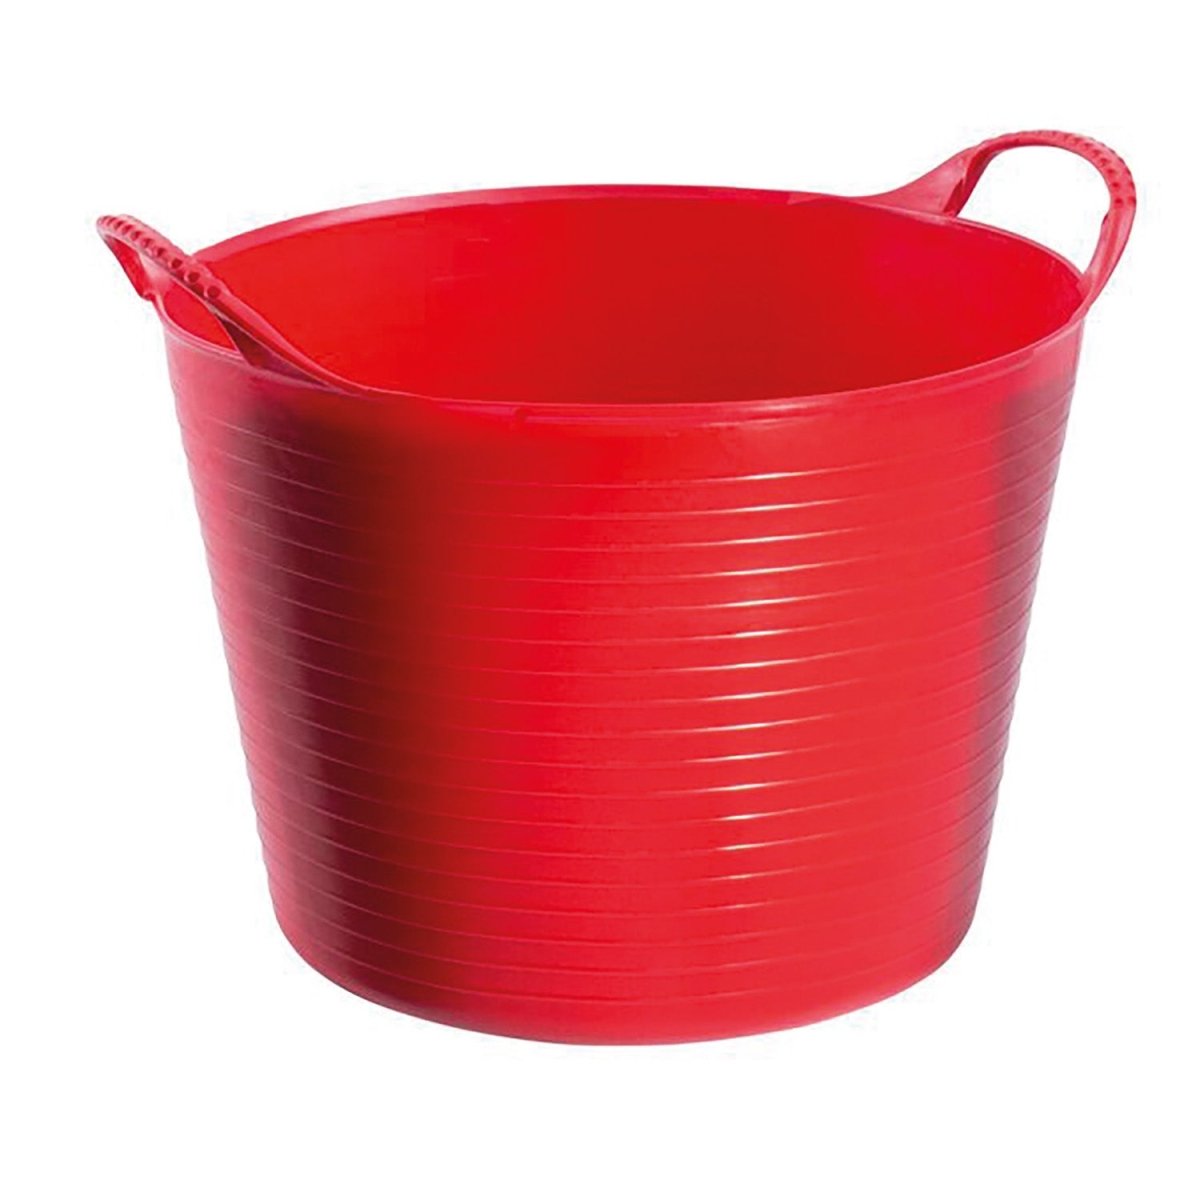 Red Gorilla Tubtrug Flexible Small - Red - Small(14Lt)